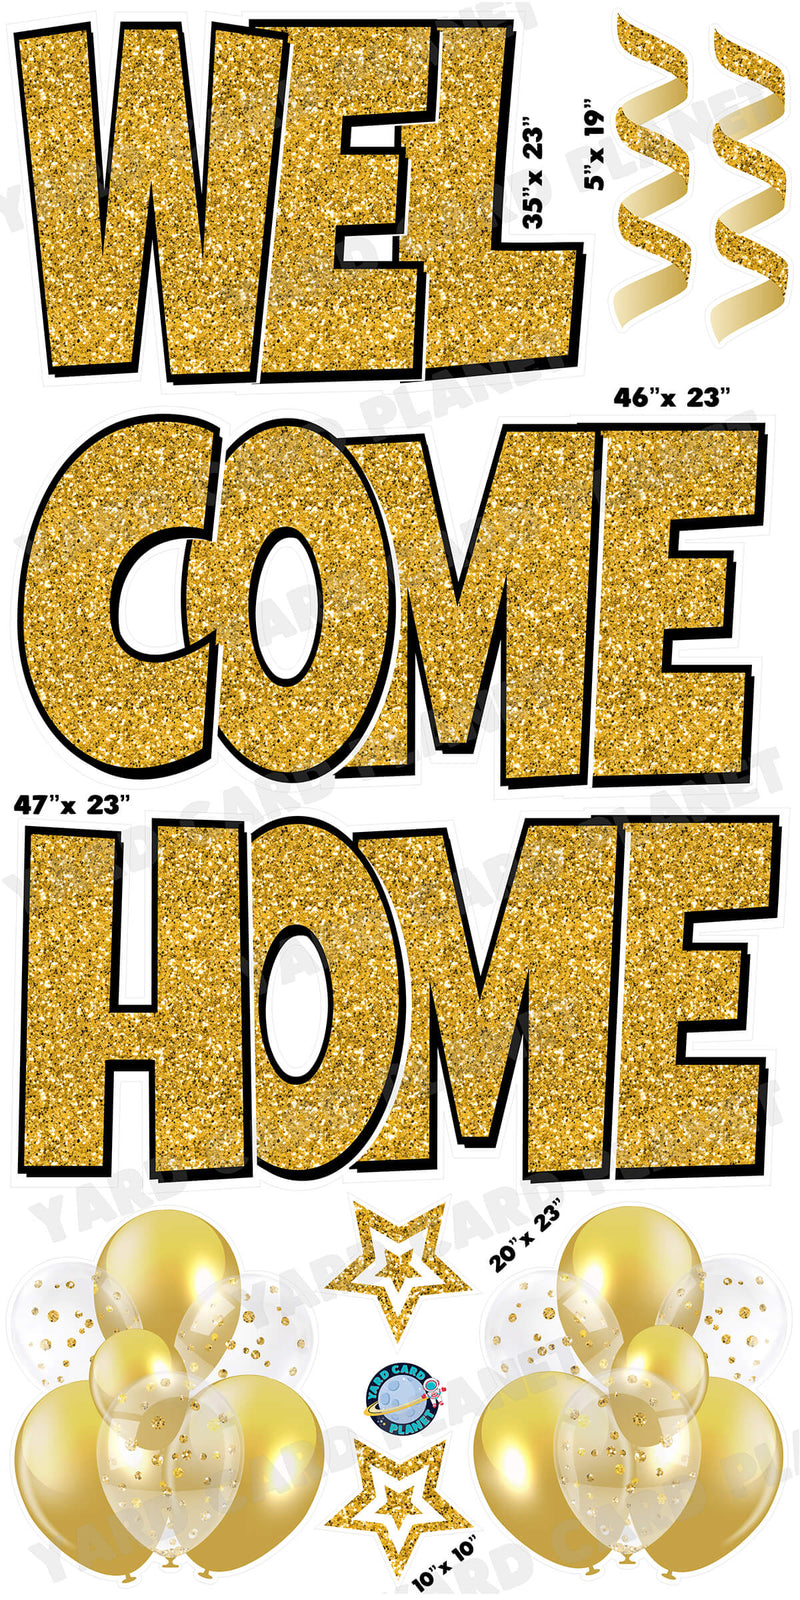 Large 23" Welcome Home Yard Card EZ Quick Sets in Luckiest Guy Font and Flair in Gold Glitter Pattern